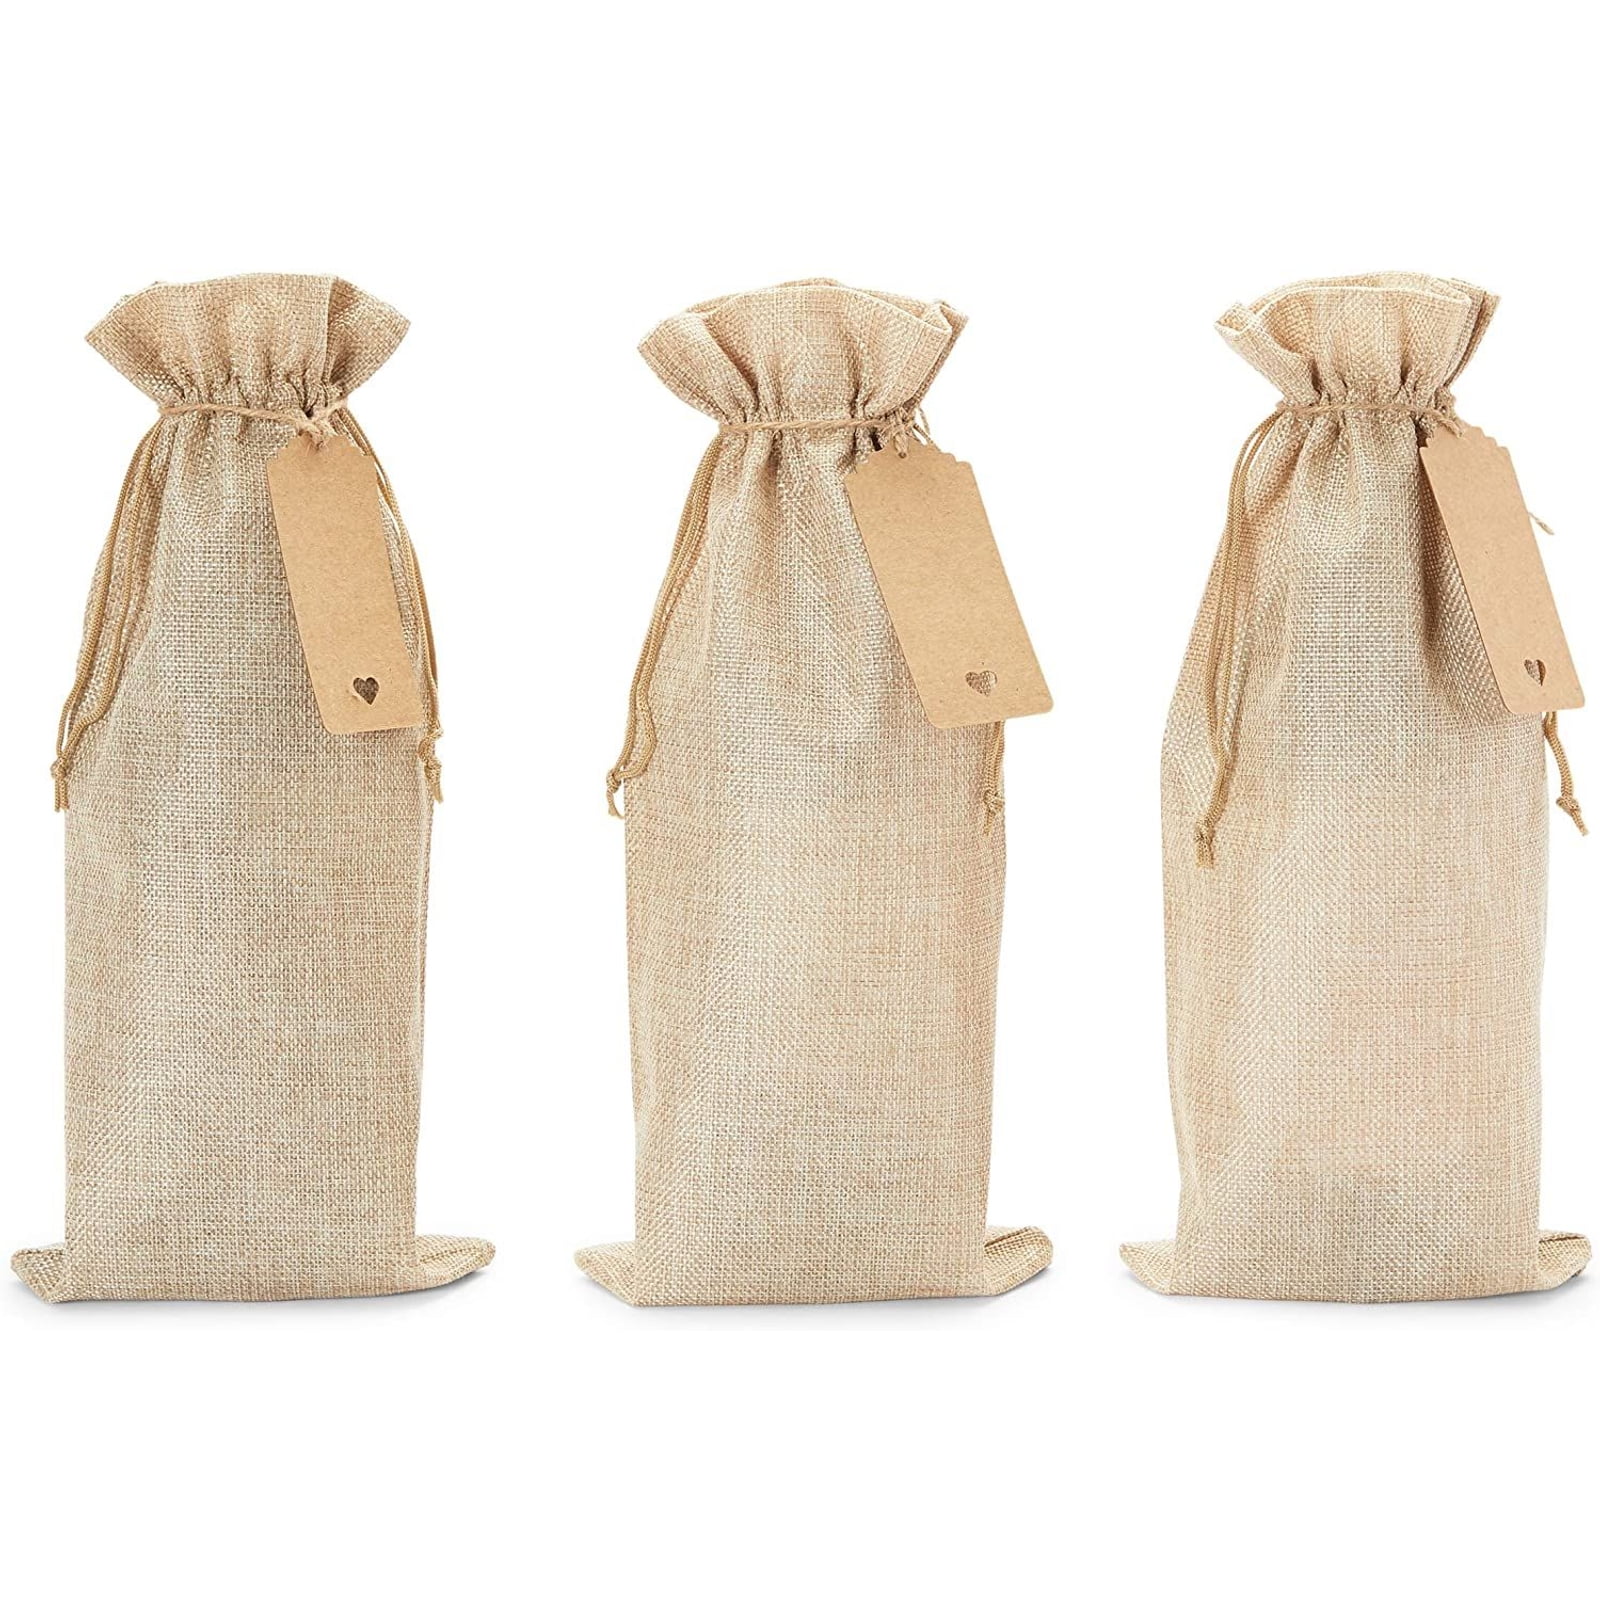 12 Pcs Burlap Wine Bags Wine Bottle Gift Bagcans Canvas Wine Bags for Birthday Party Original Brown Color Reusable Wine Bottle Covers with Drawstring Tag & Rope Wine Gift Bags Valentine 14x6 Wedding 